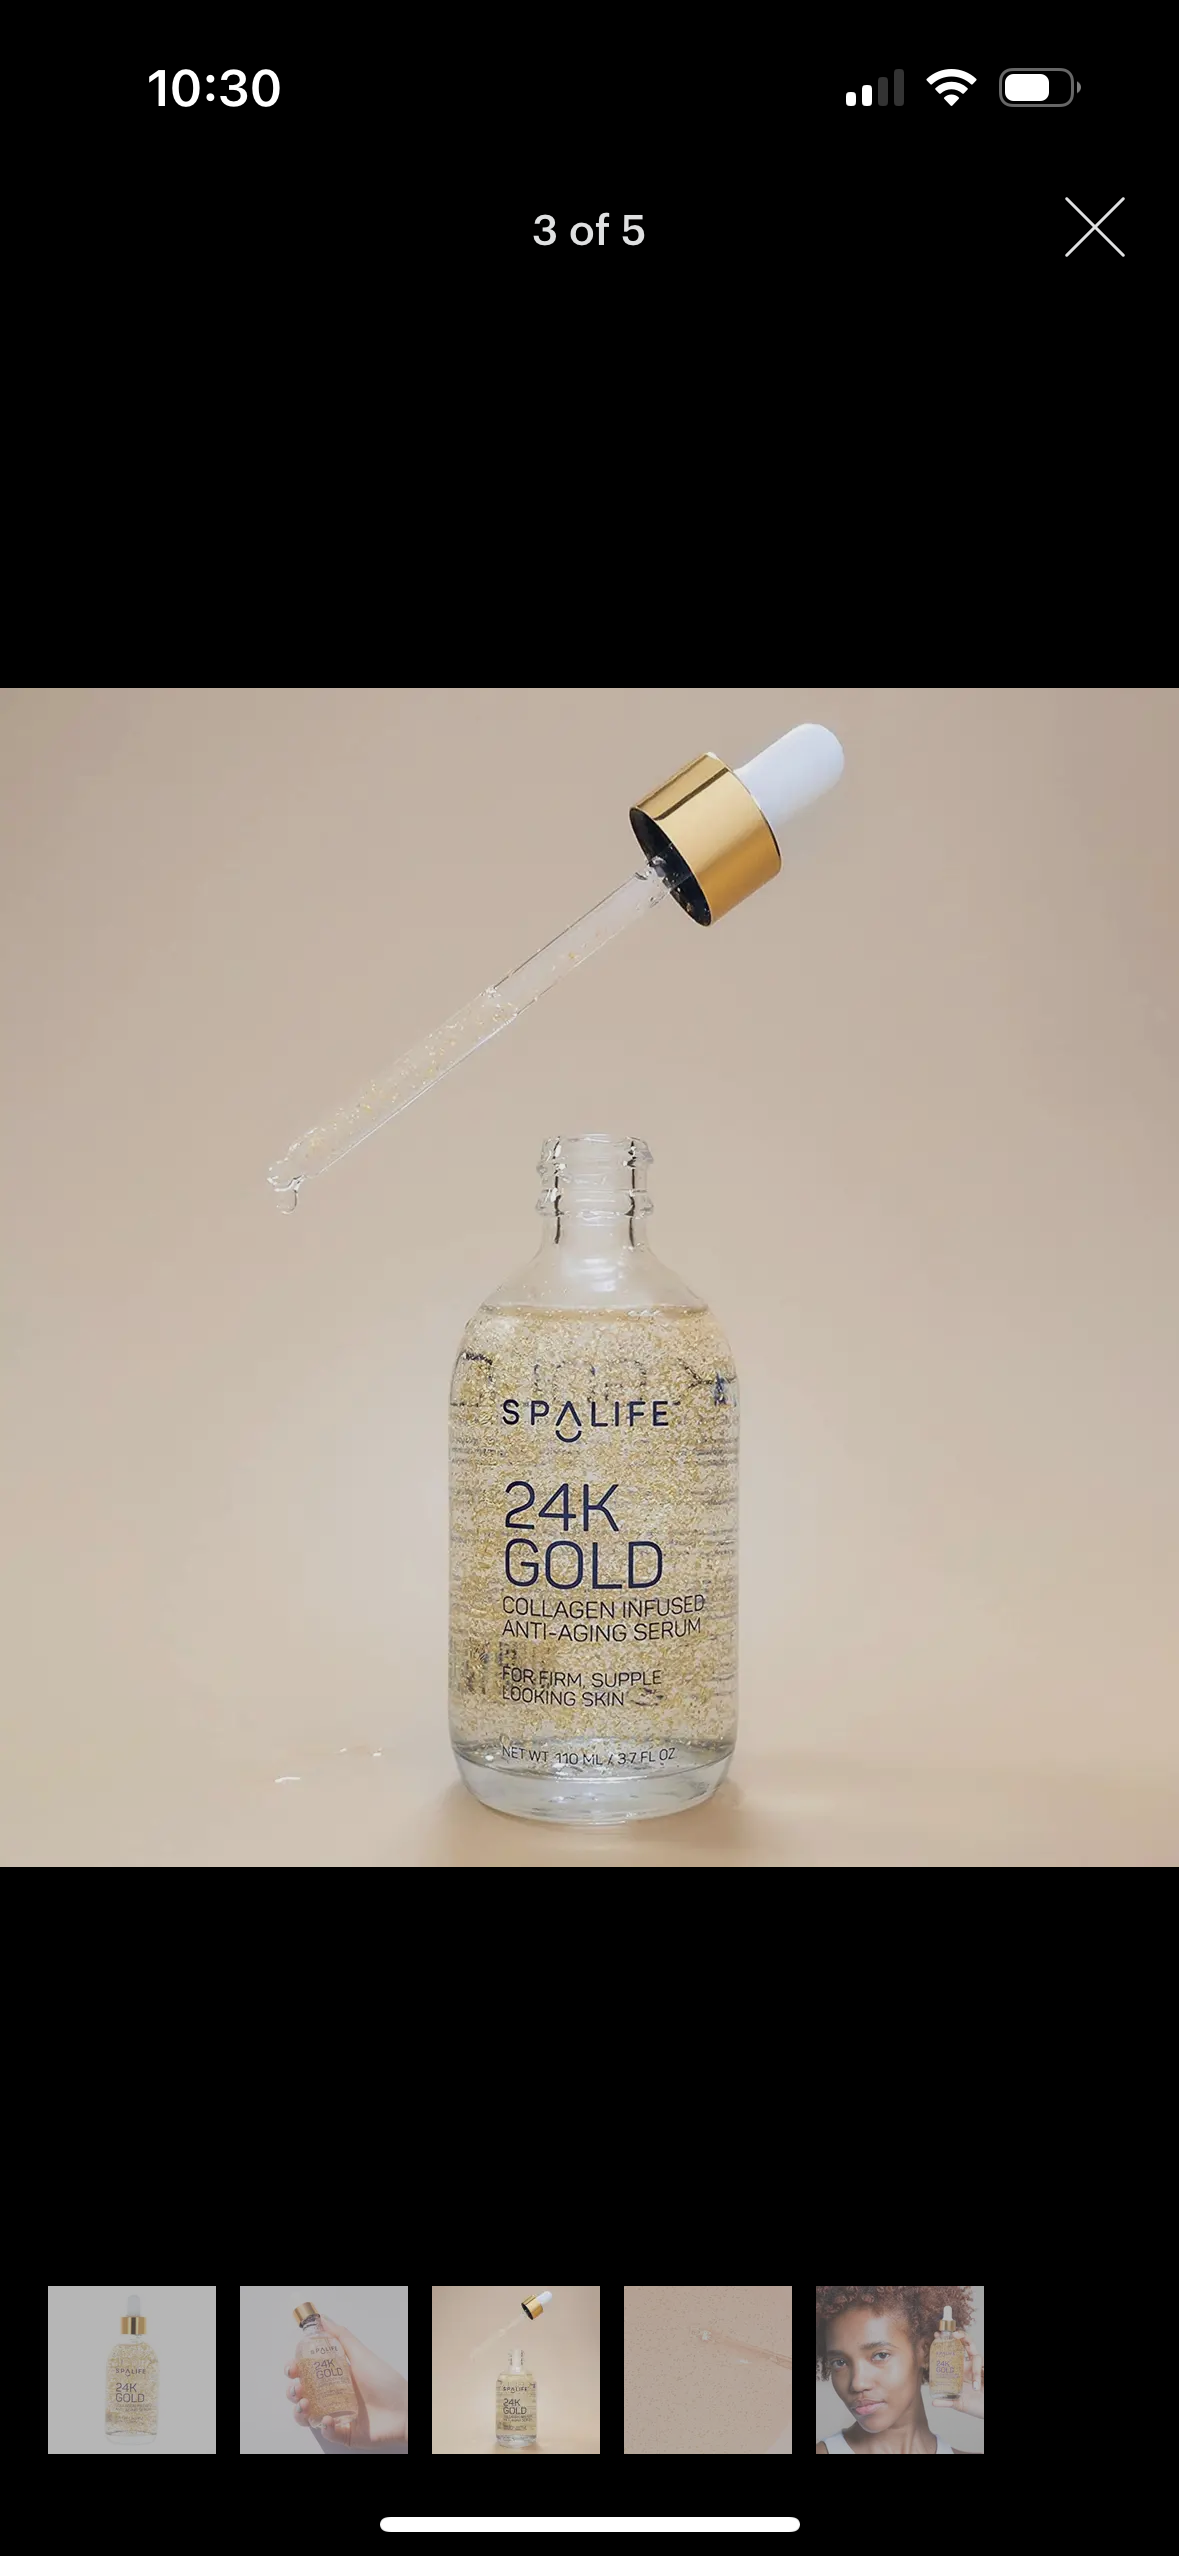 Gold 24K Collagen Infused Anti-Aging Serum